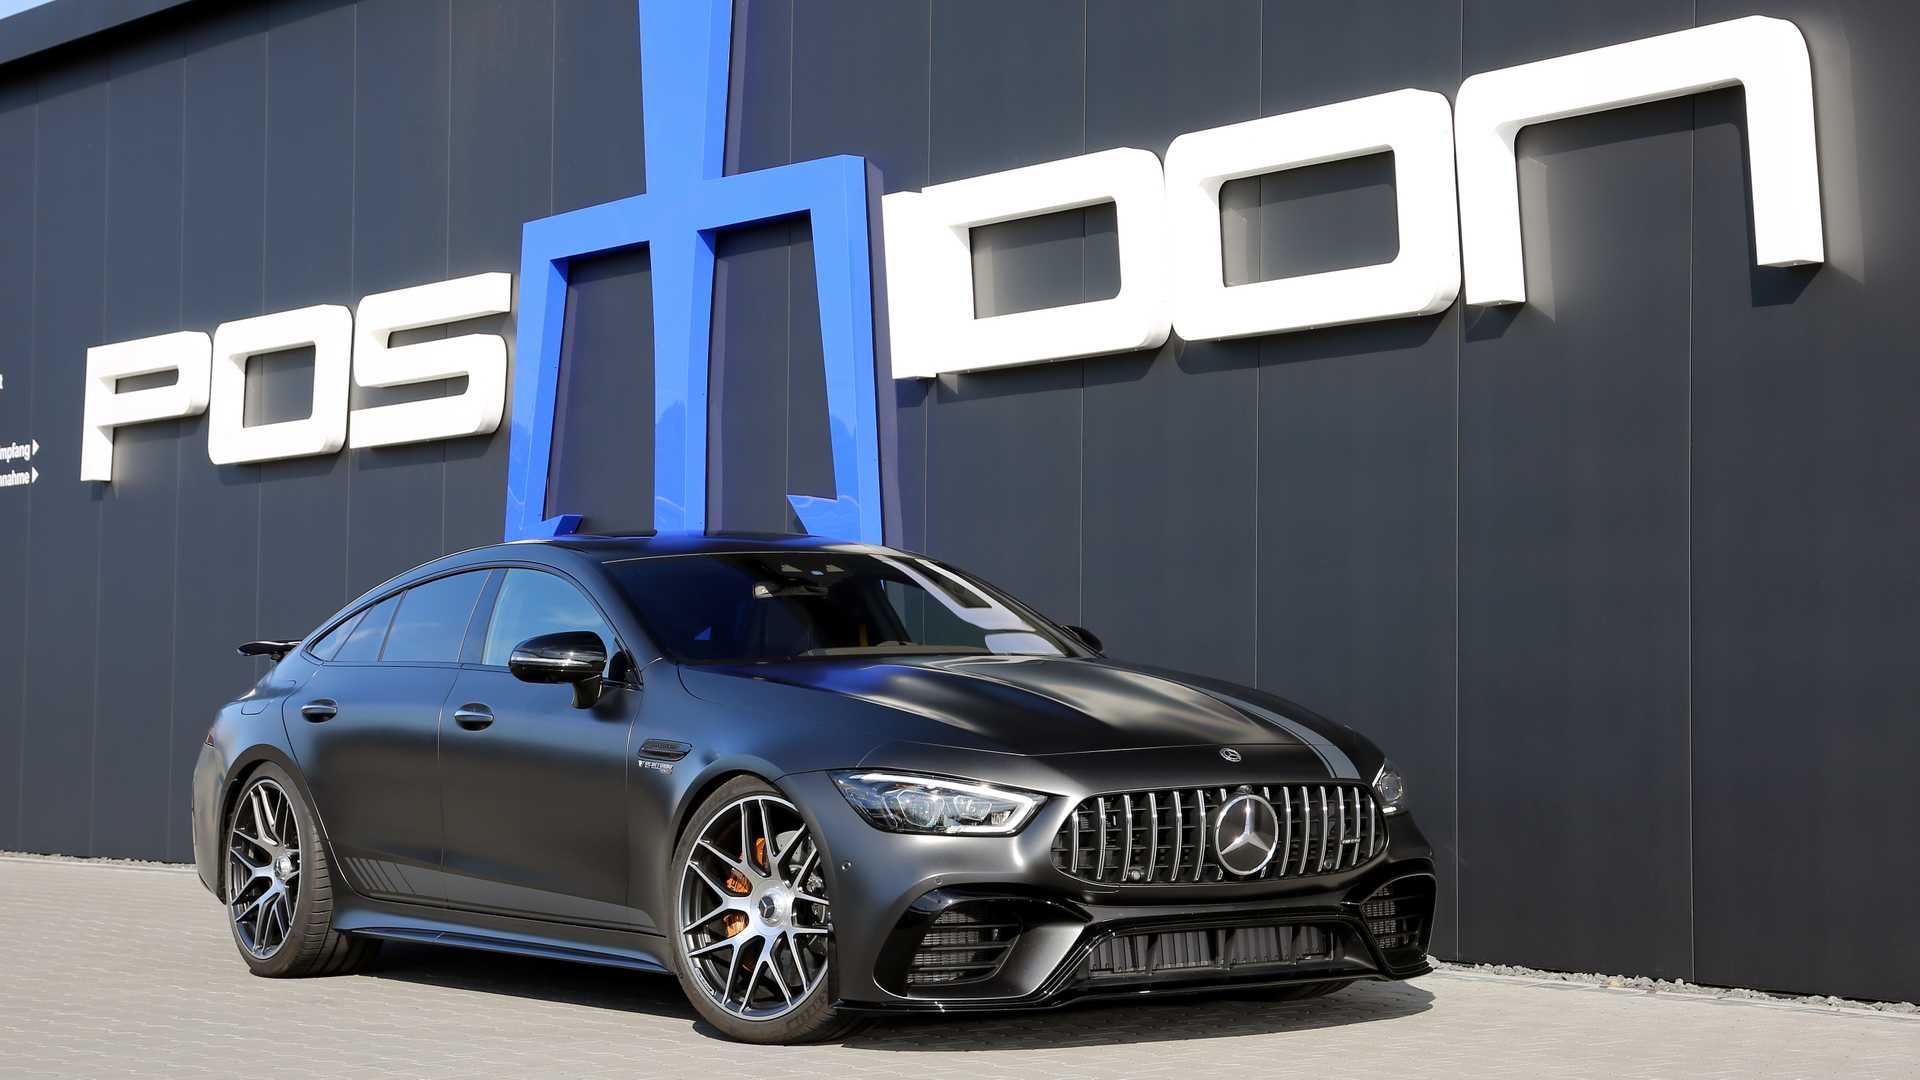 Posaidon Mercedes-AMG GT 63 S